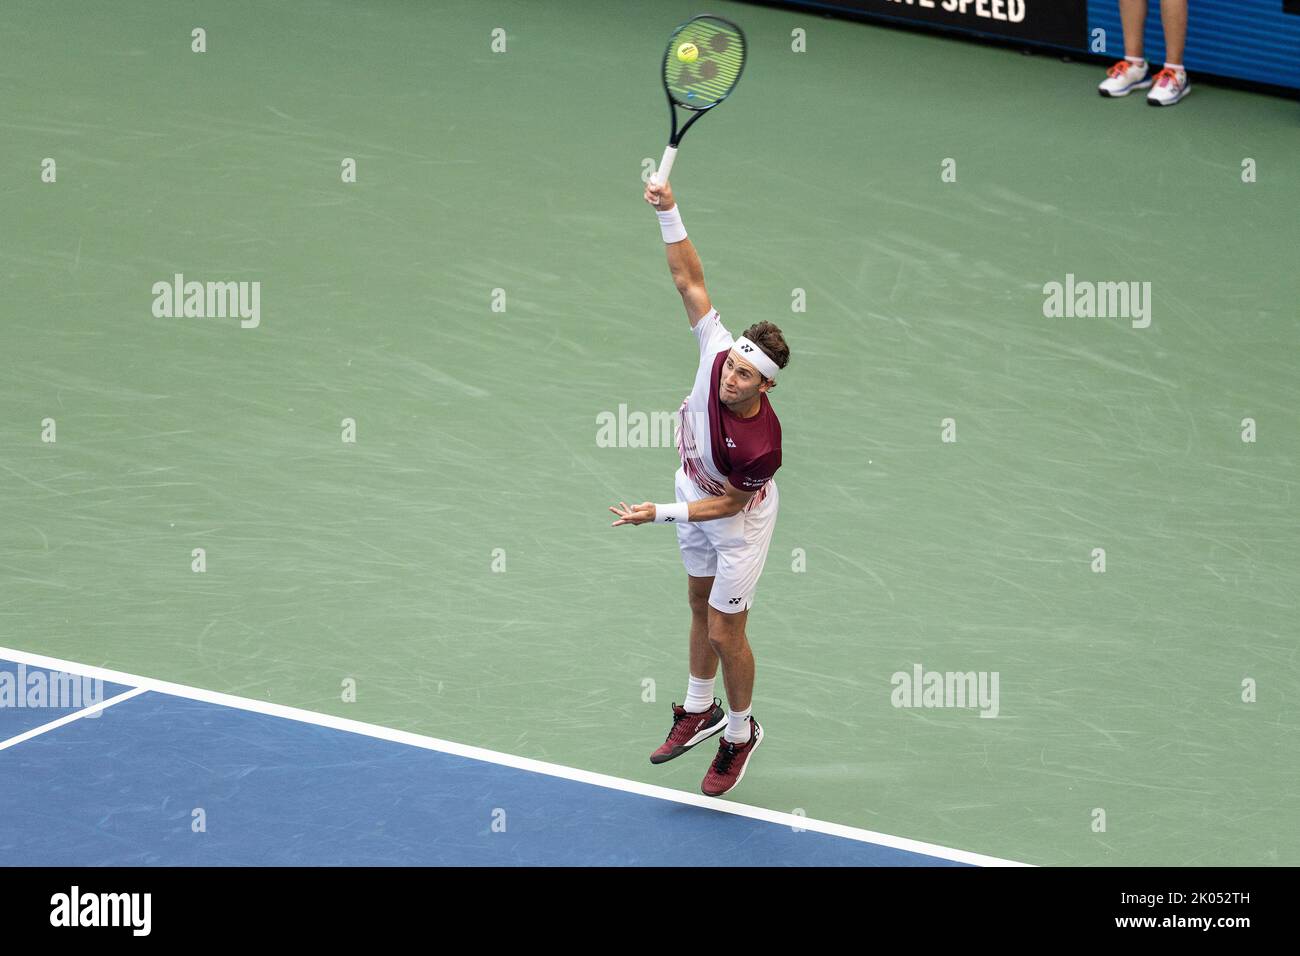 New York, USA. 09th Sep, 2022. Casper Ruud of Norway serves during semifinal of US Open Championships against Karen Khachanov at USTA Billie Jean King National Tennis Center in New York on September 9, 2022. Ruud won in four sets and will play his first ever US Open final. (Photo by Lev Radin/Sipa USA) Credit: Sipa USA/Alamy Live News Stock Photo